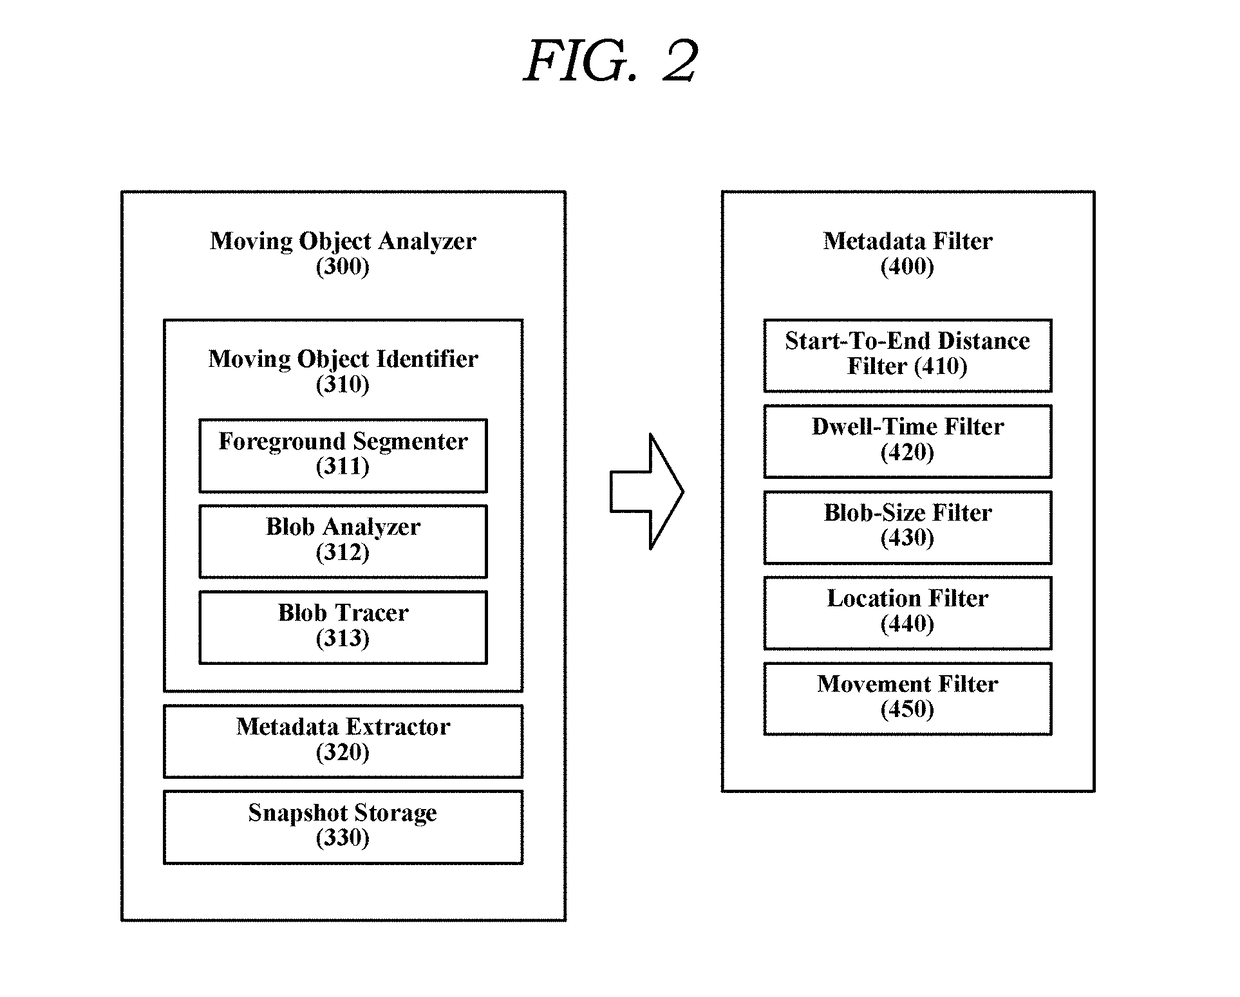 Method of detecting critical objects from CCTV video using metadata filtering